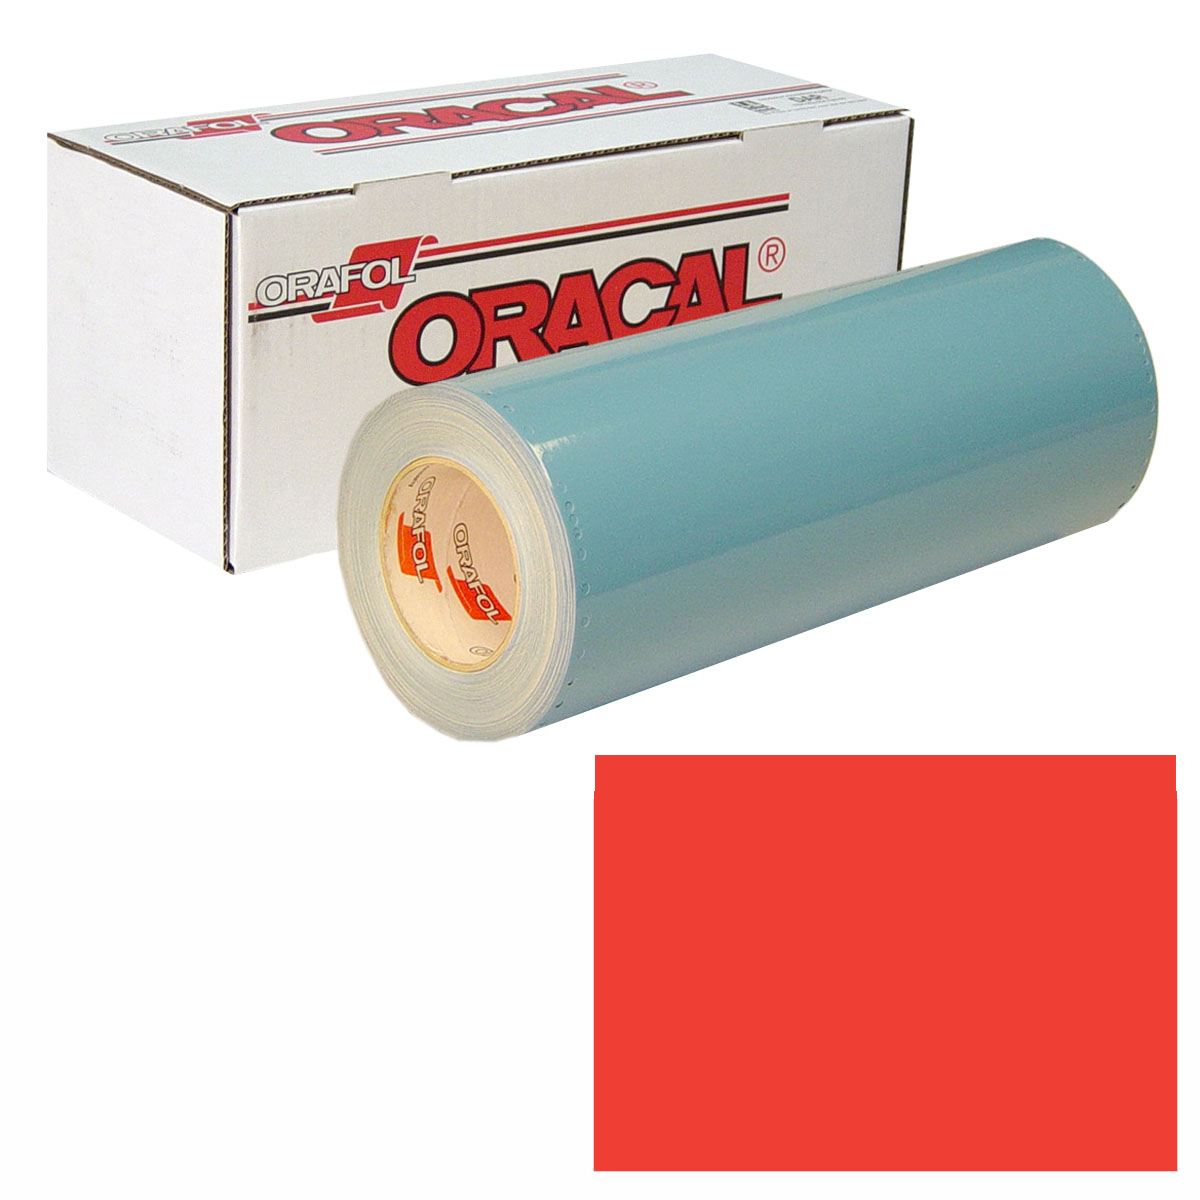 ORACAL 751 Unp 24in X 50yd 325 Middle Red